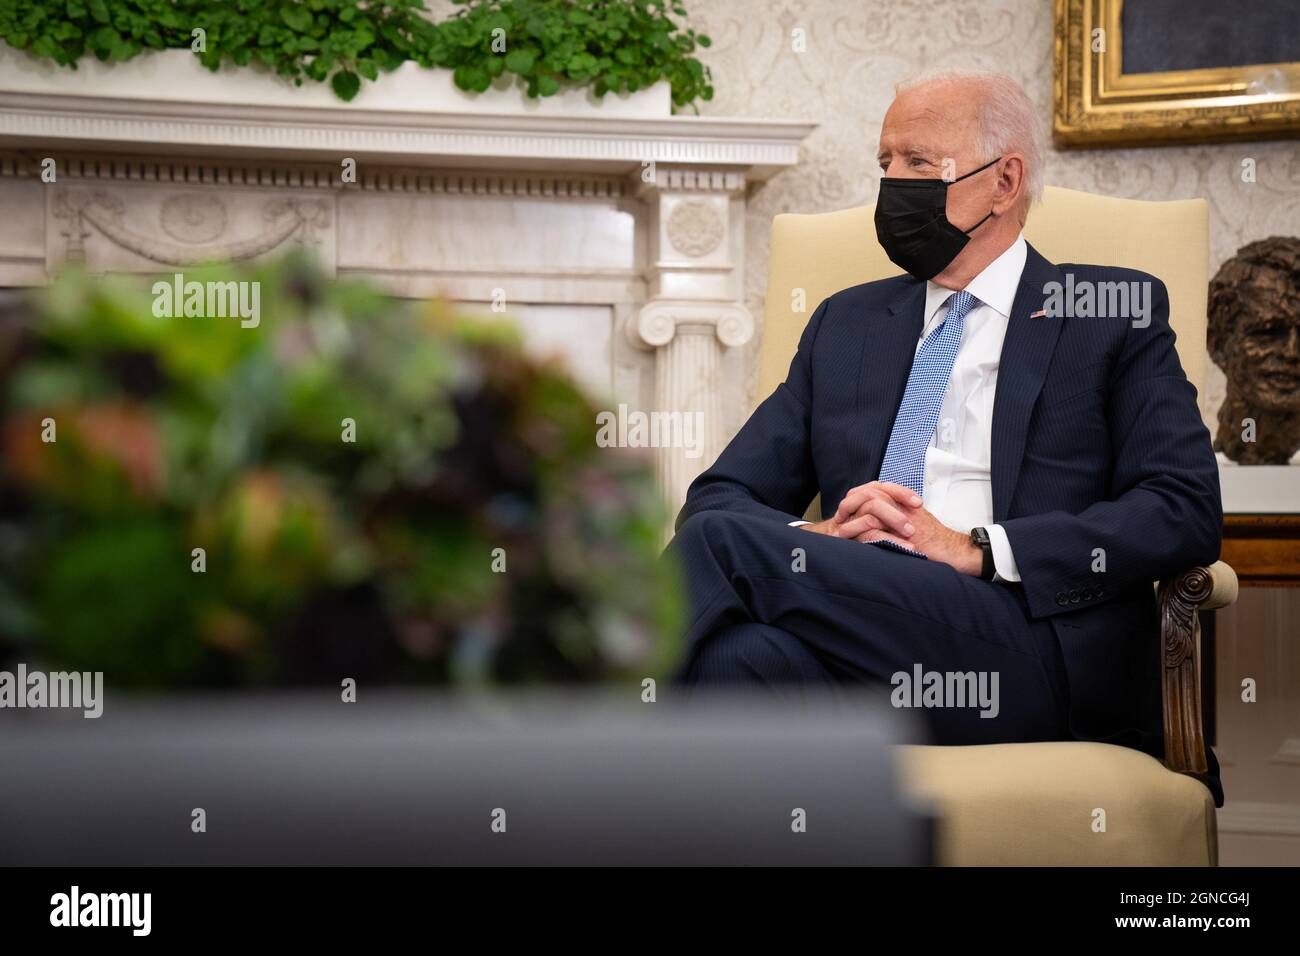 Washington DC, USA. 24th Sep, 2021. President Joe Biden talks with India Prime Minister Narendra Modi during a bilateral meeting before the Quad Leaders Summit in the Oval Office at the White House in Washington, DC on Friday, September 24, 2021. Photo by Sarahbeth Maney/UPI Credit: UPI/Alamy Live News Stock Photo